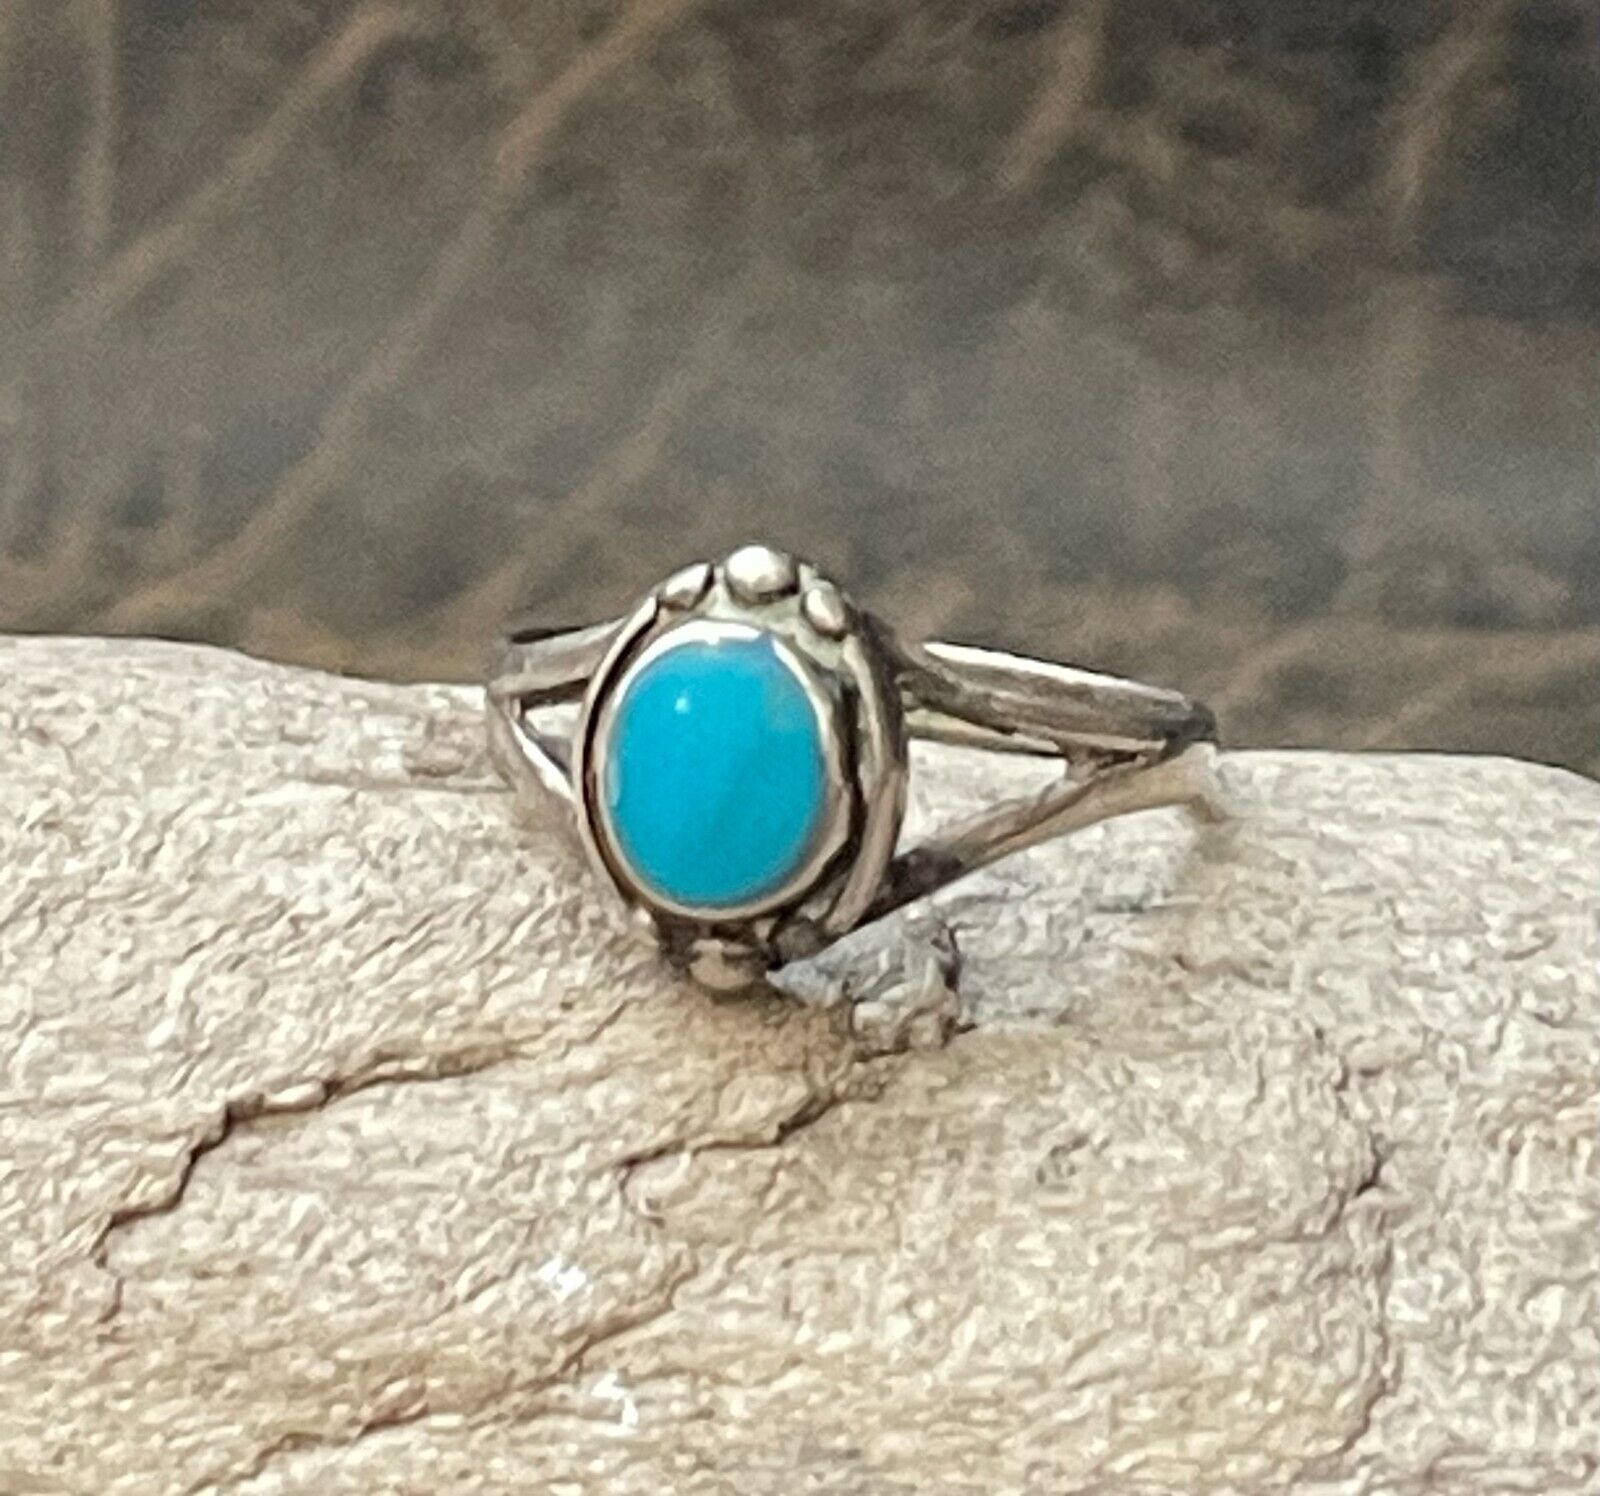 VINTAGE NAVAJO NATIVE AMERICAN FRED HARVEY RT 66 SILVER TURQUOISE RING 6.75